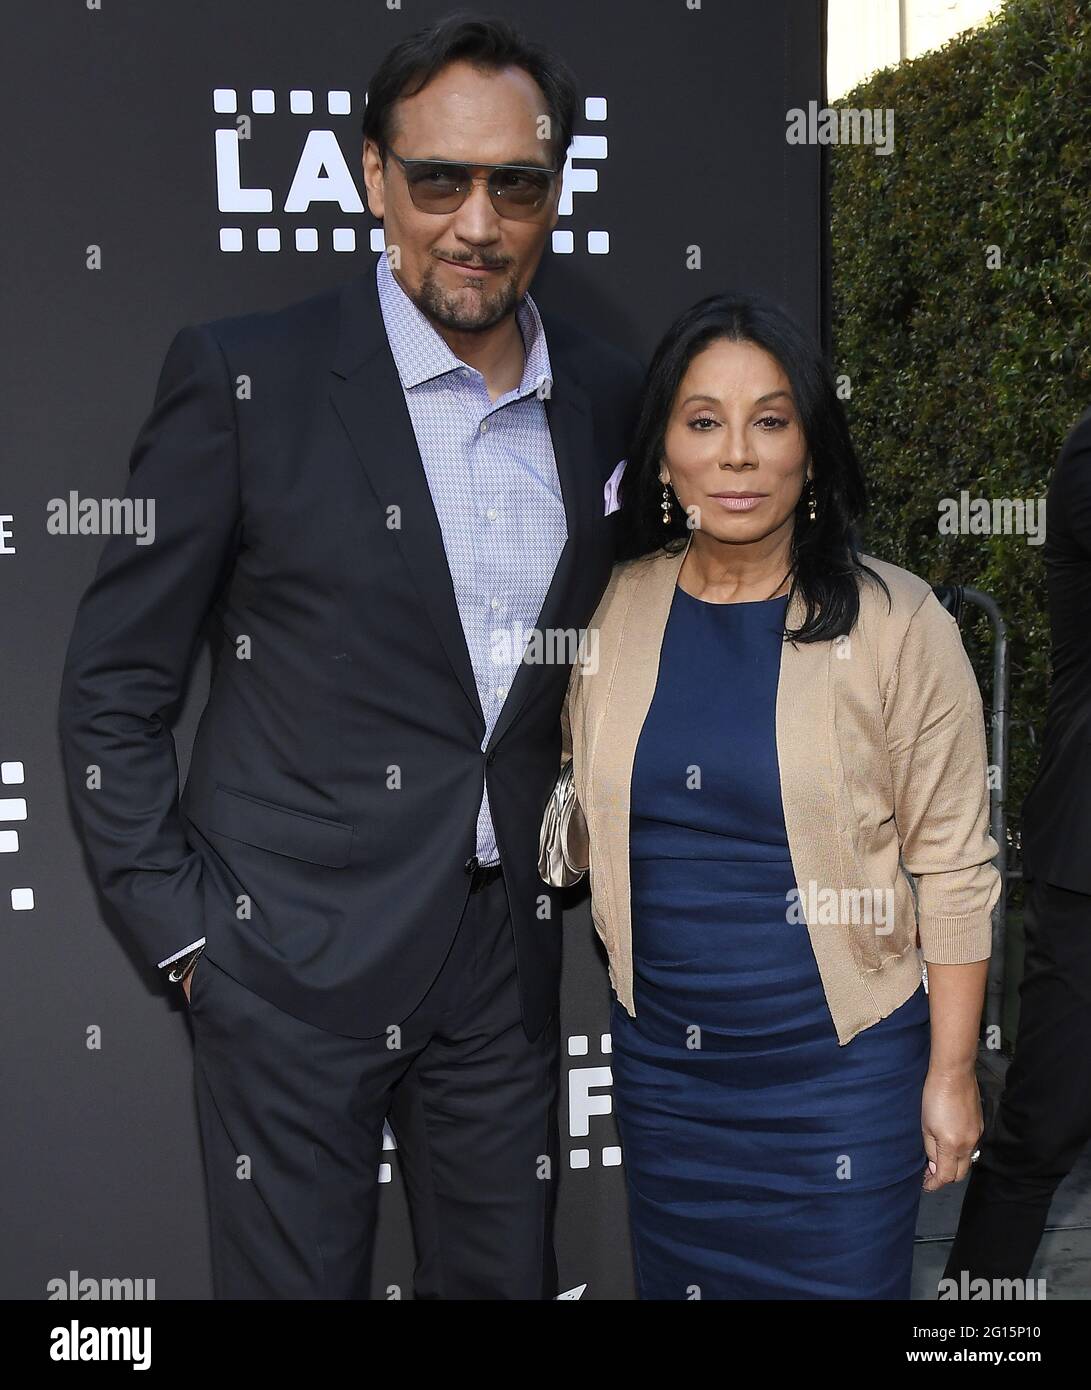 Los Angeles, USA. 04th June, 2021. (L-R) Jimmy Smits and Wanda De Jesus arrives at the 2021 Los Angeles Latino International Film Festival - IN THE HEIGHTS Special Preview Screening held at the TCL Chinese Theatre in Hollywood, CA on Friday, ?June 4, 2021. (Photo By Sthanlee B. Mirador/Sipa USA) Credit: Sipa USA/Alamy Live News Stock Photo